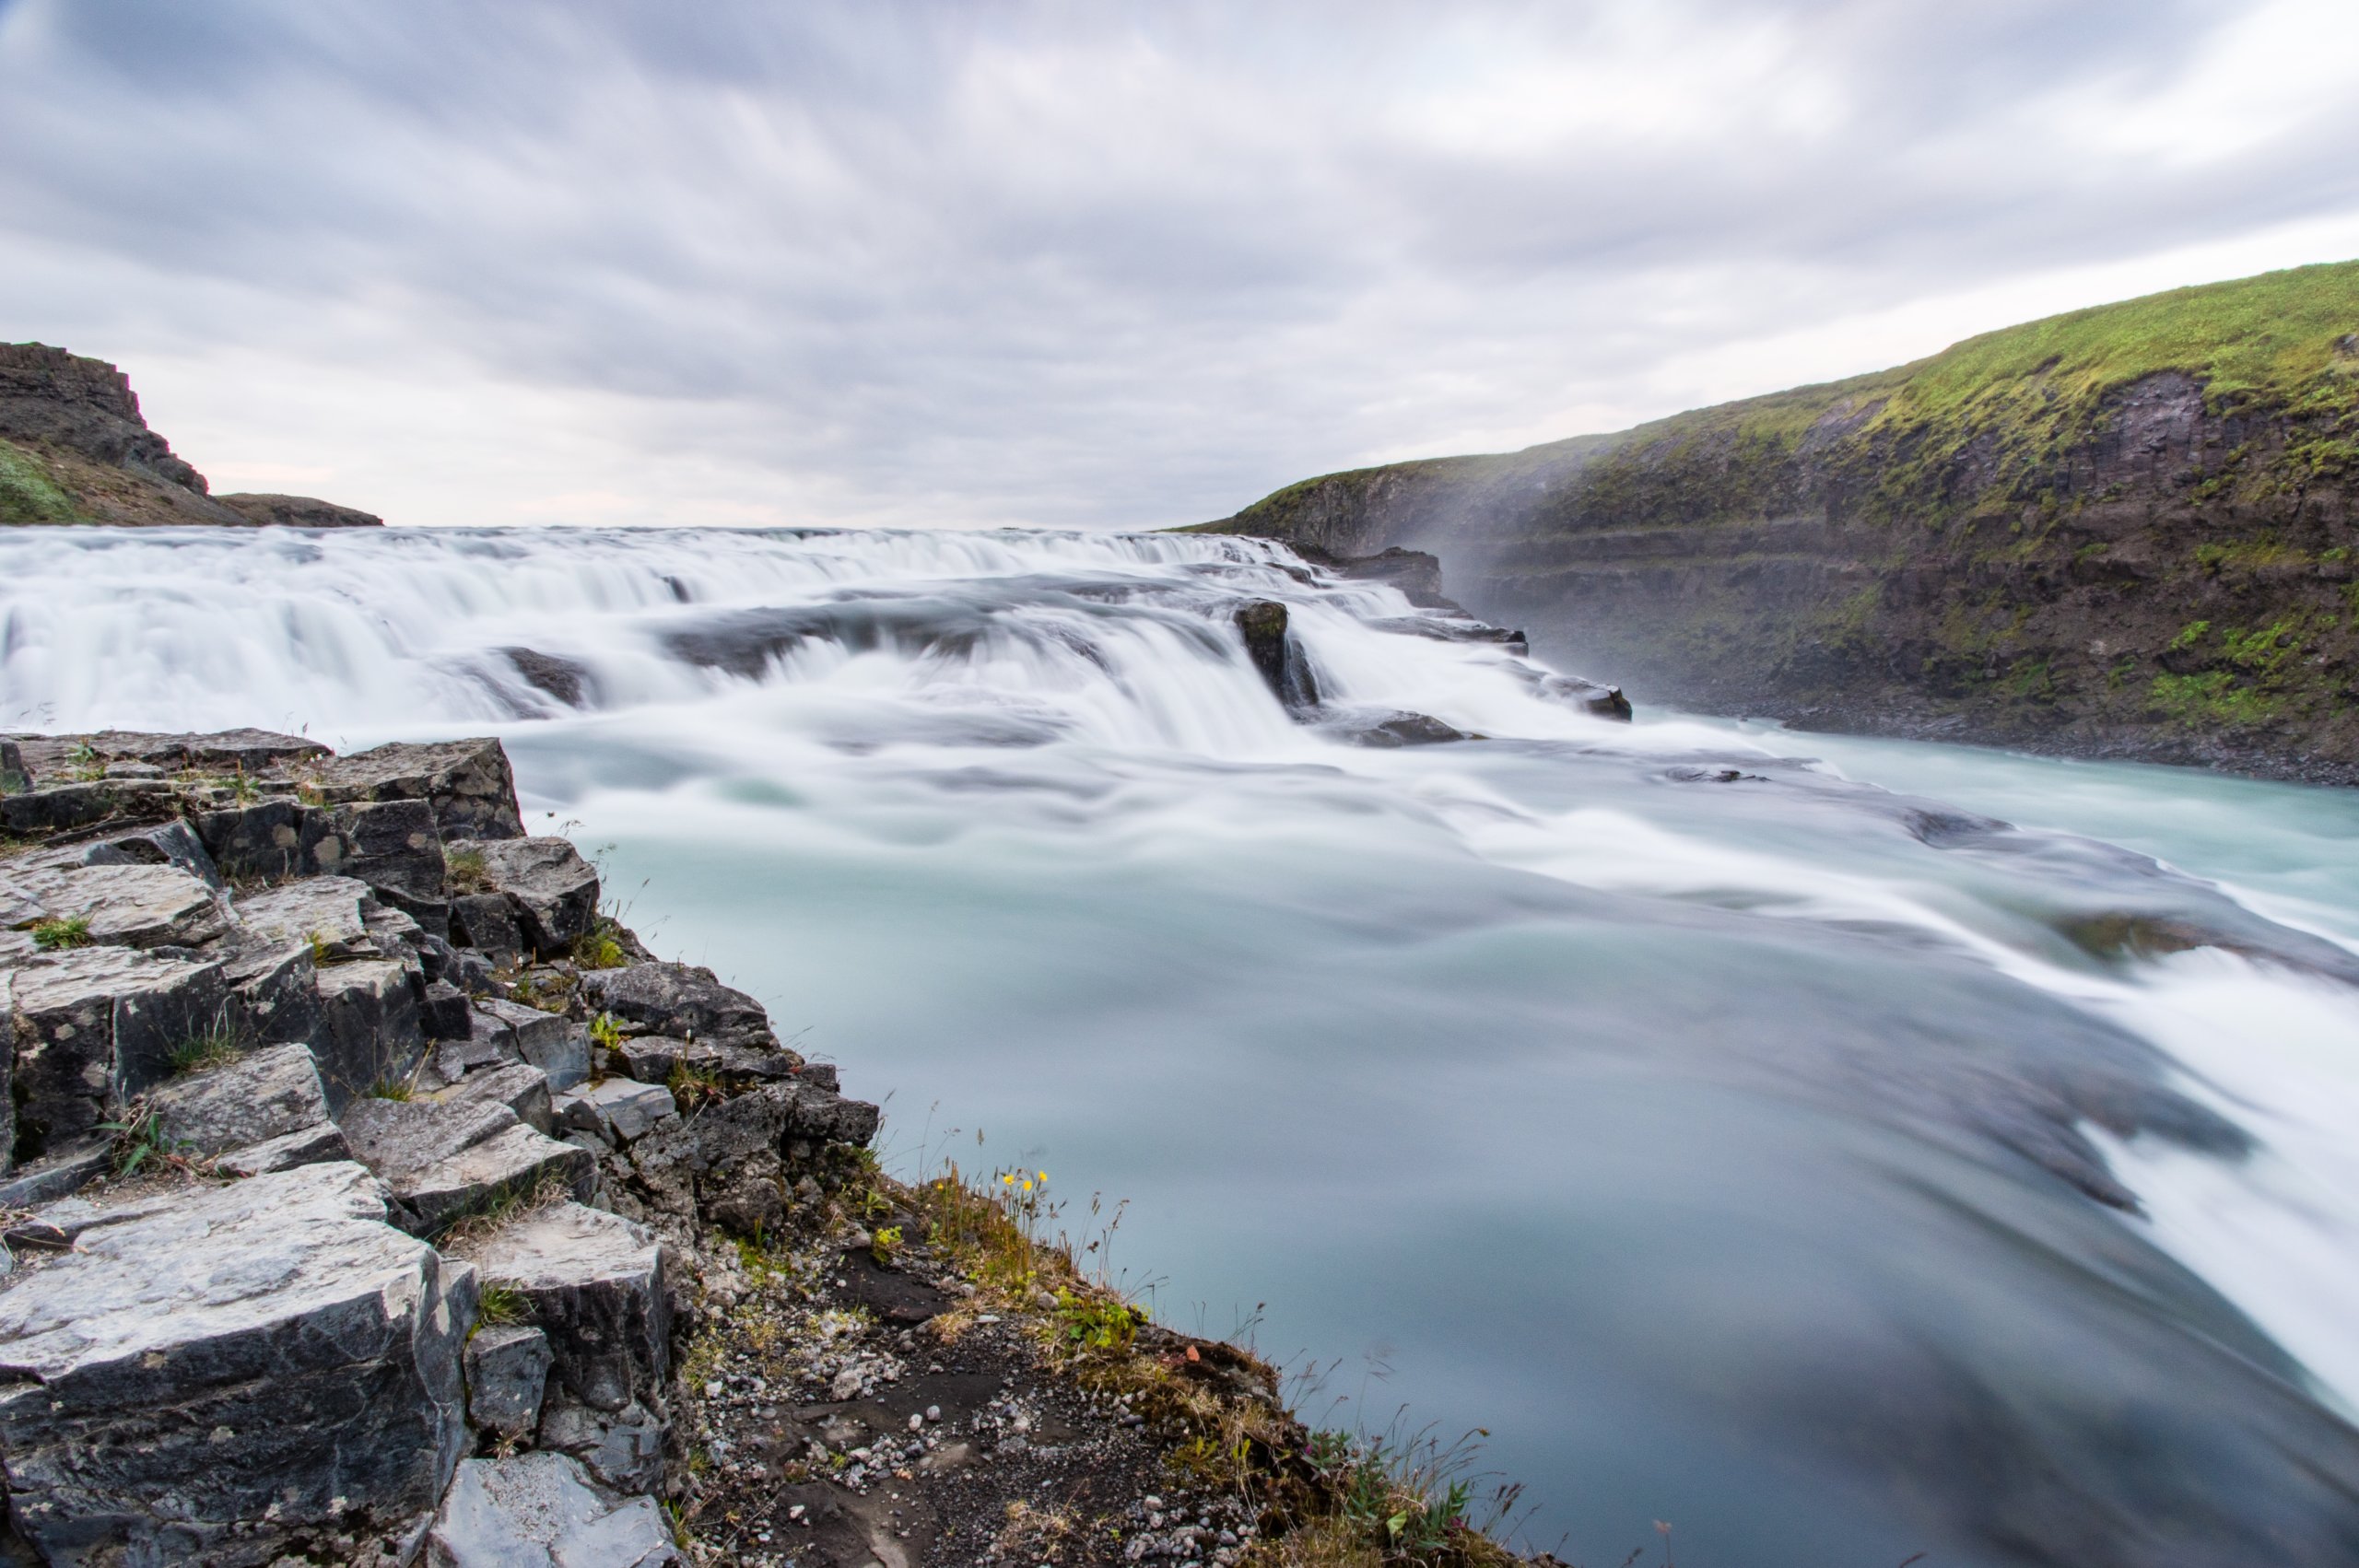 Montreal to Reykjavik, Iceland | $398 CAD roundtrip including taxes | WOW Air – Nonstop flight